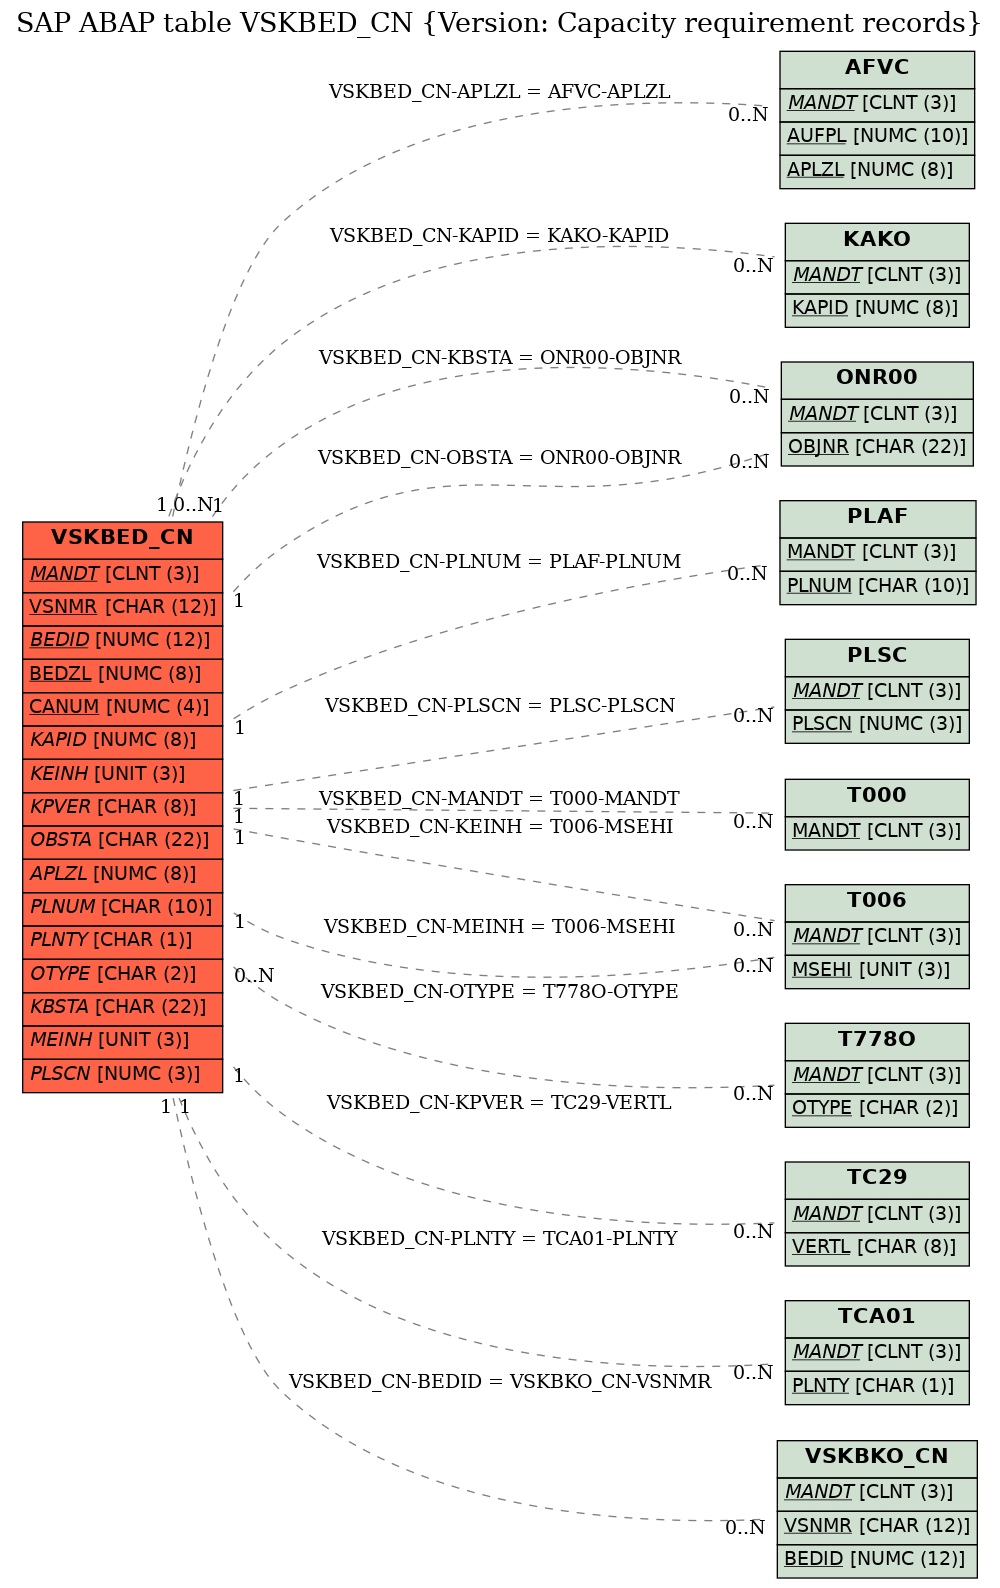 E-R Diagram for table VSKBED_CN (Version: Capacity requirement records)